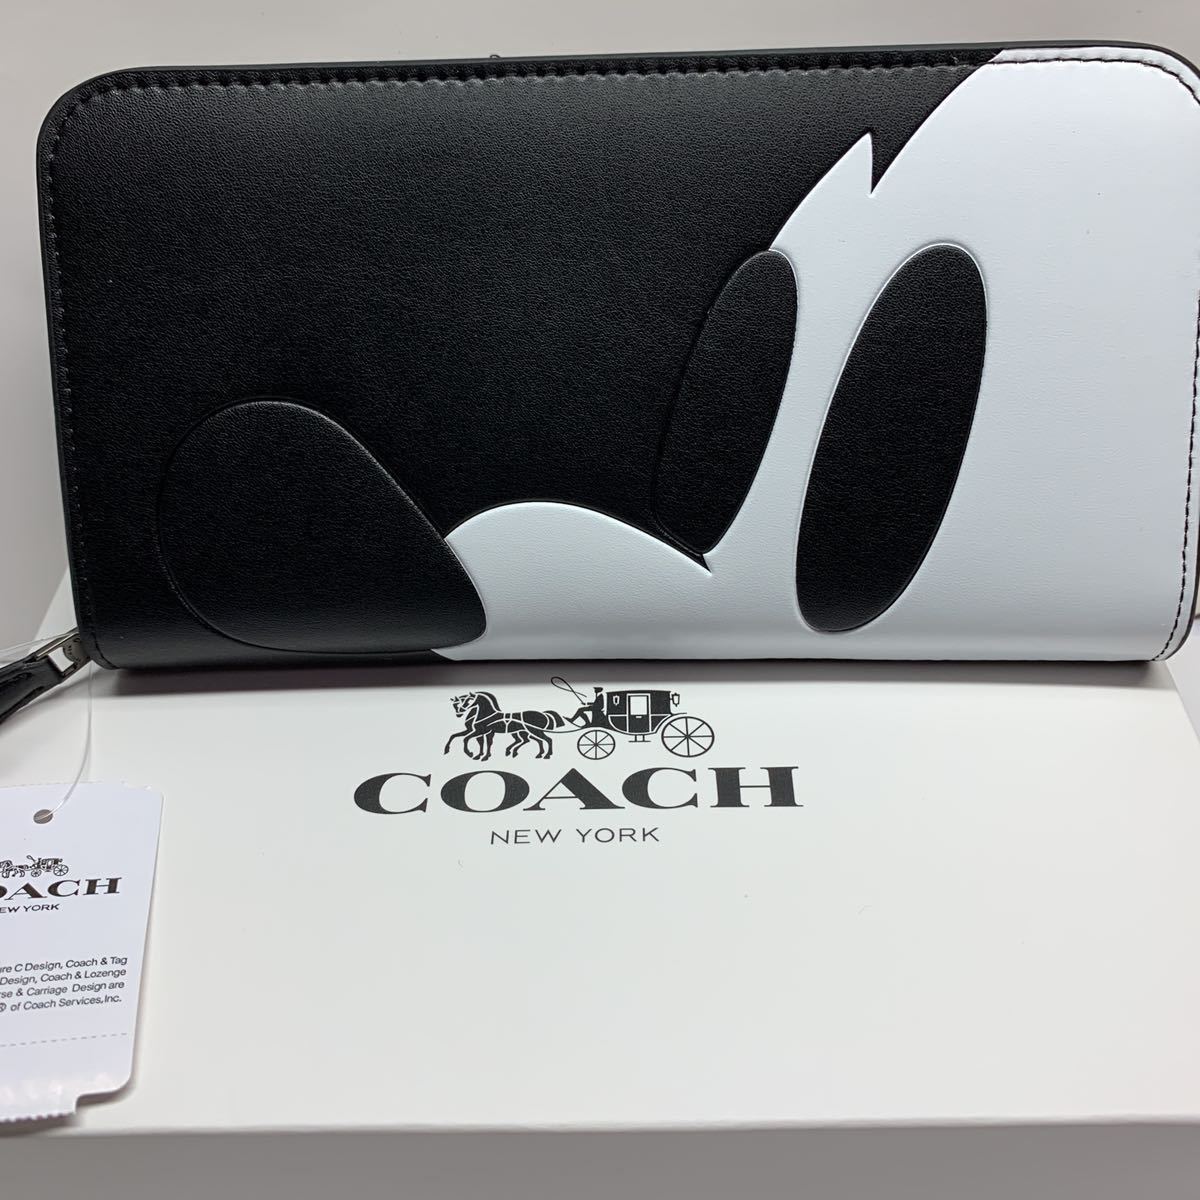 Coach 新品箱タグ付き 長財布 ディズニーコラボ ミッキー横顔 F ミッキー７５周年記念コーチコラボ限定品 アウトレット 翌日発送 Product Details Yahoo Auctions Japan Proxy Bidding And Shopping Service From Japan